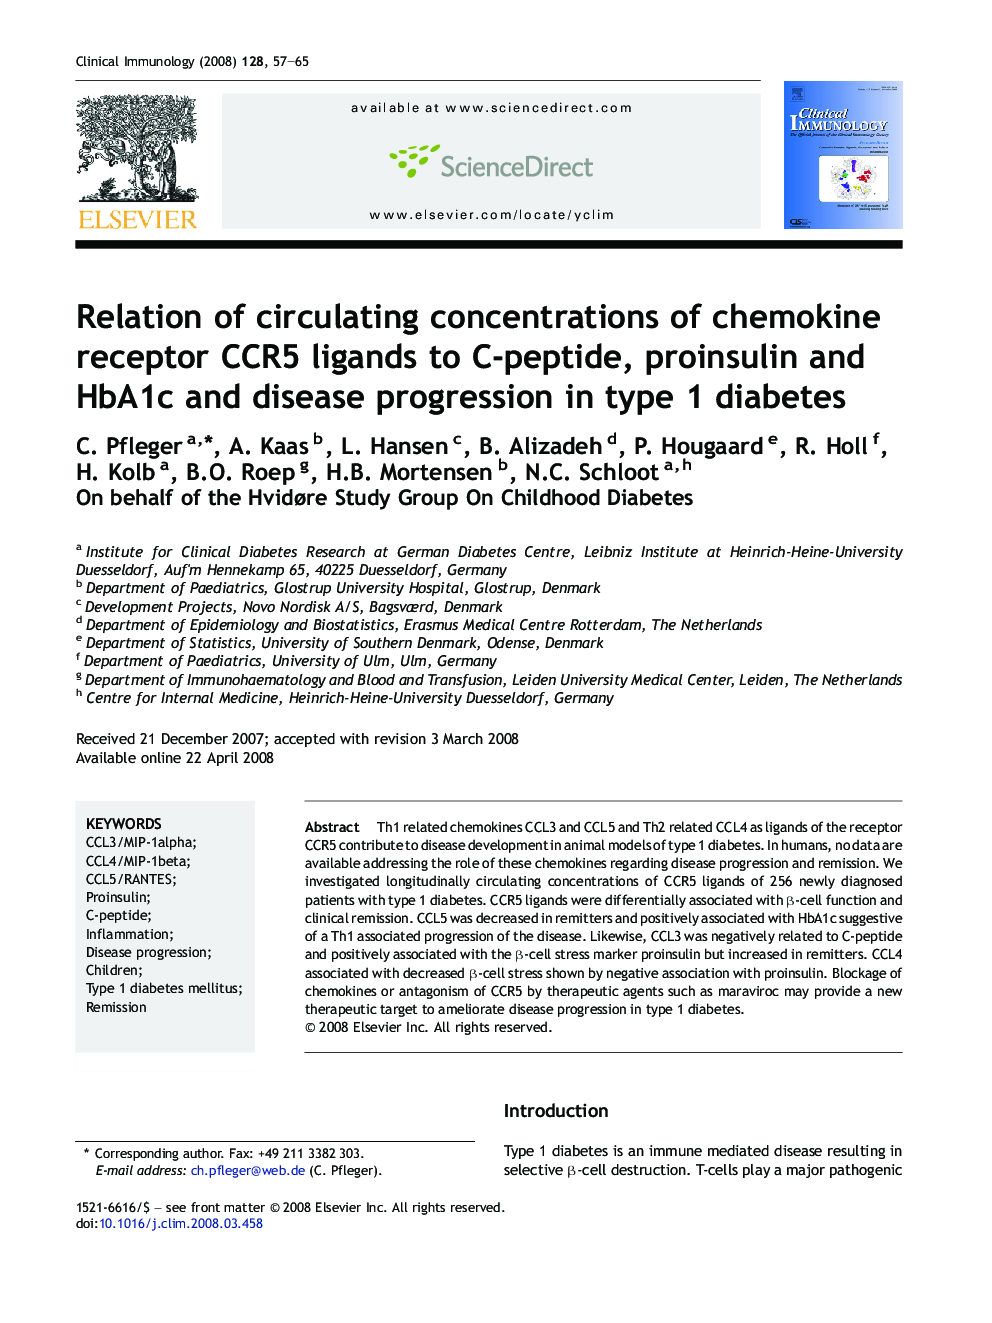 Relation of circulating concentrations of chemokine receptor CCR5 ligands to C-peptide, proinsulin and HbA1c and disease progression in type 1 diabetes